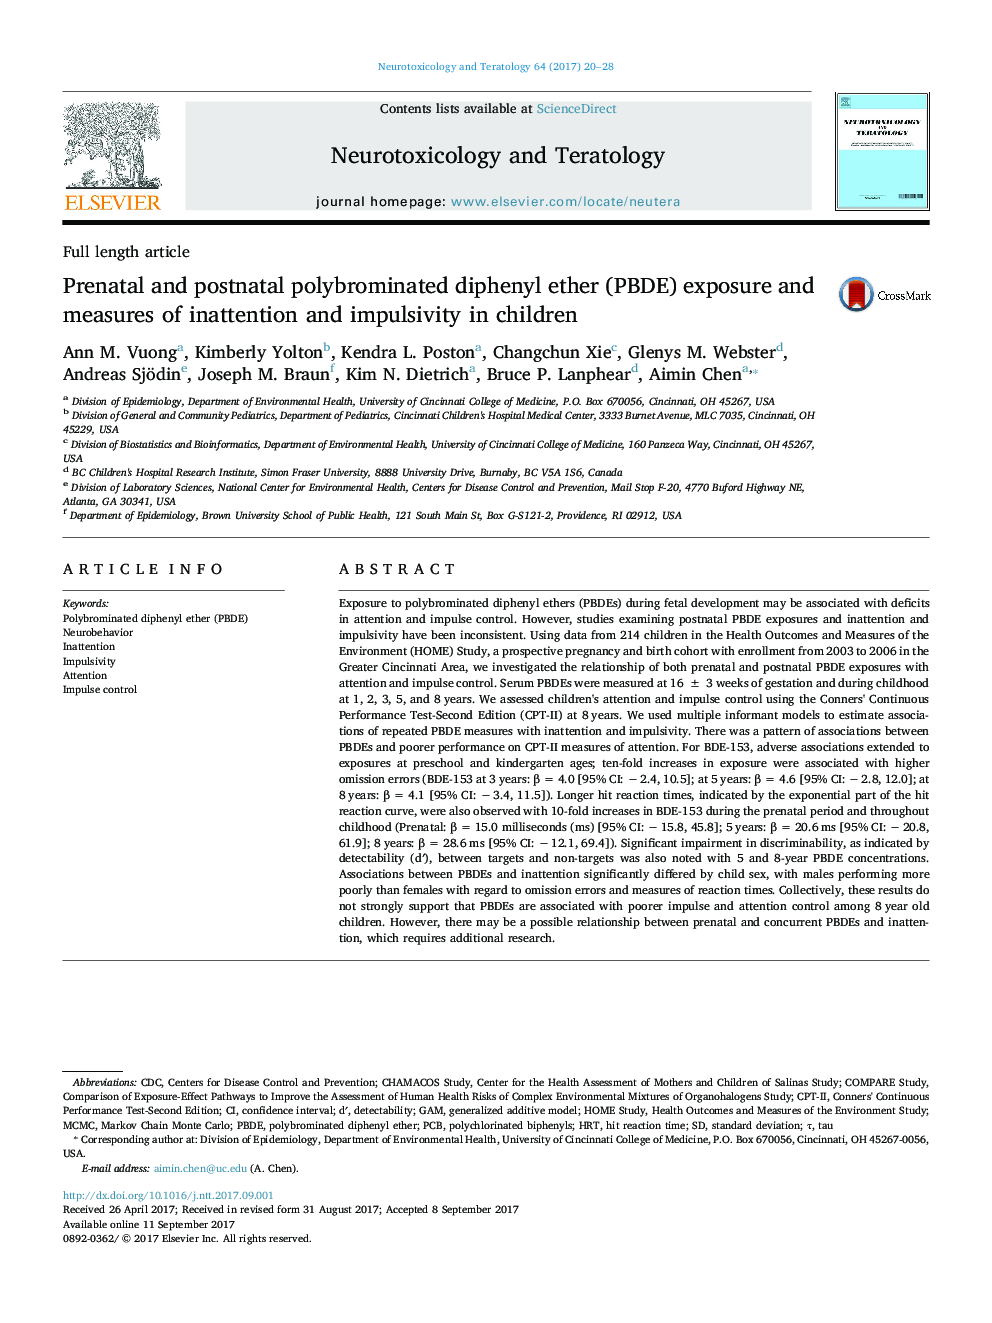 Full length articlePrenatal and postnatal polybrominated diphenyl ether (PBDE) exposure and measures of inattention and impulsivity in children